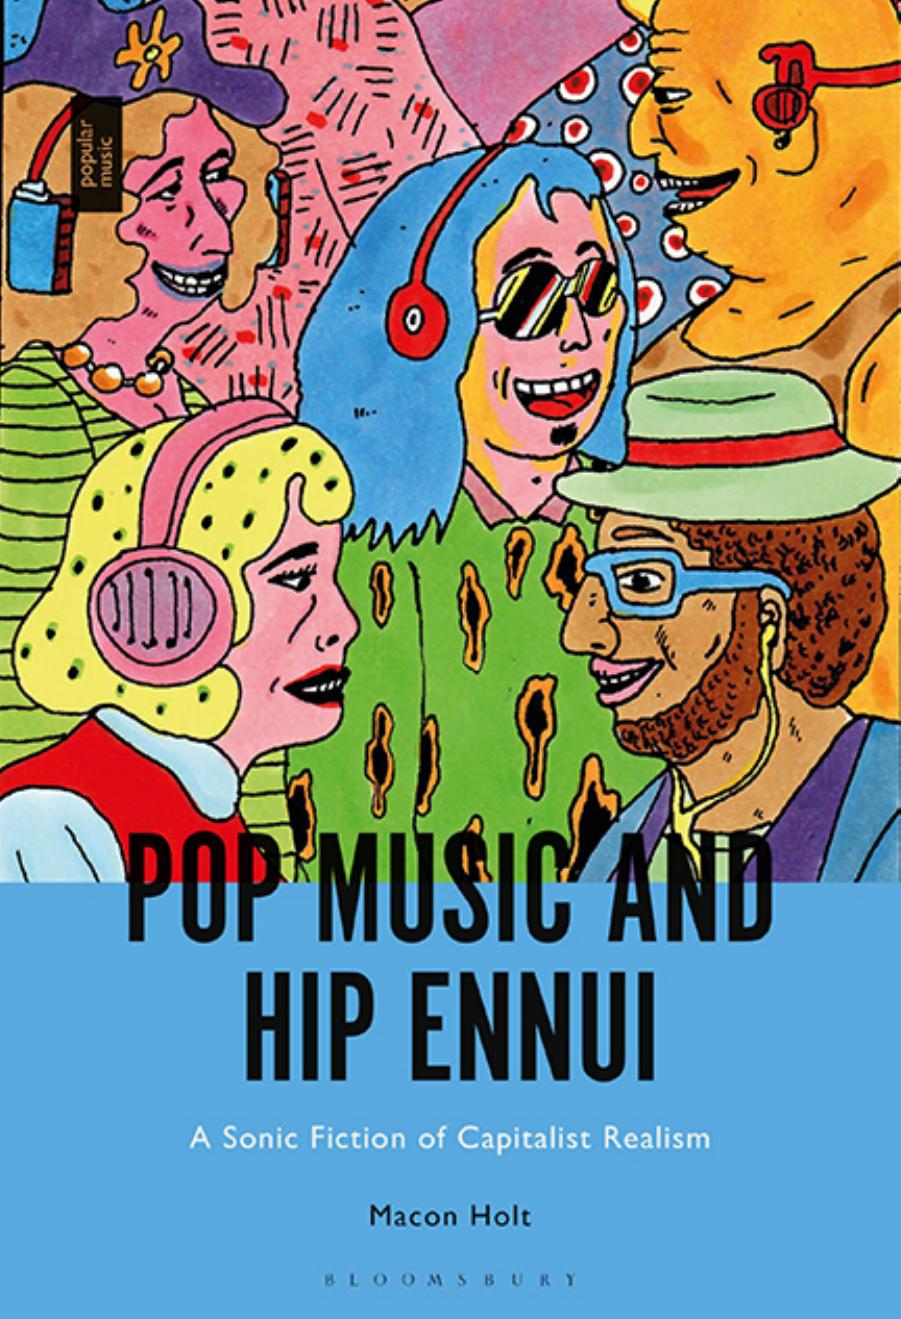 Pop Music and Hip Ennui: A Sonic Fiction of Capitalist Realism by Macon Holt